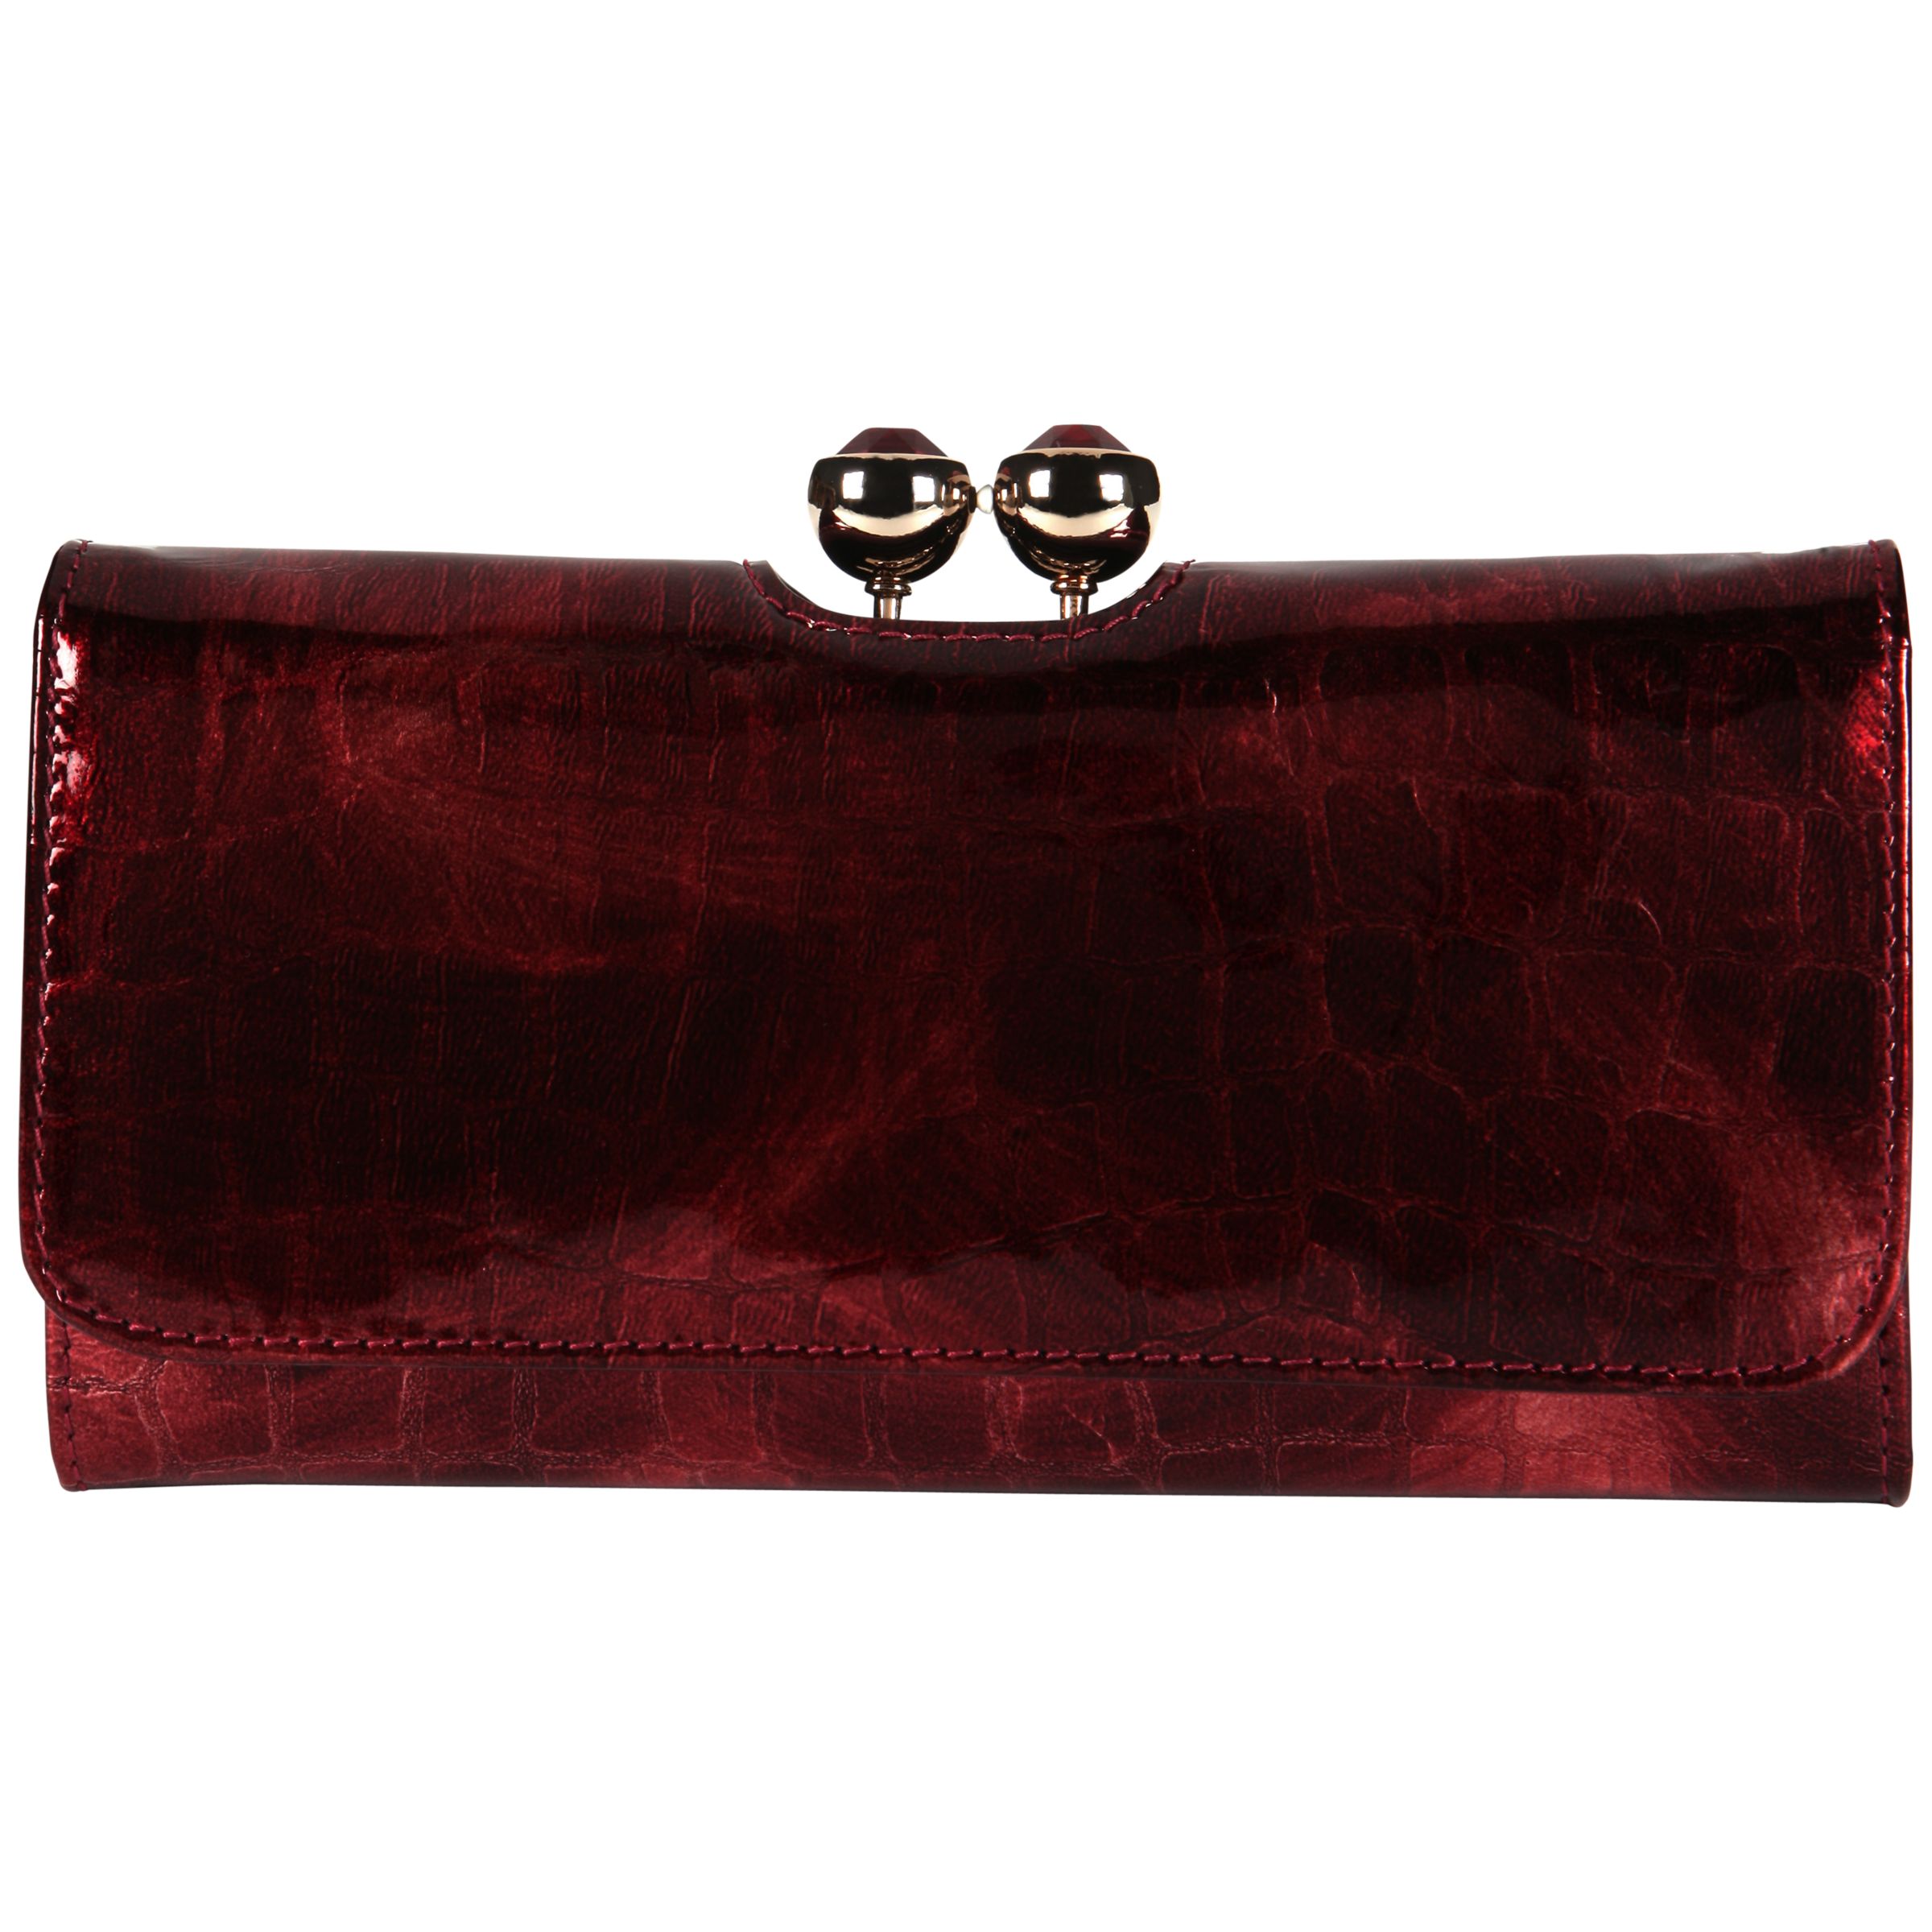 Ted Baker Croc Effect Crystal Top Purse, Dark Red